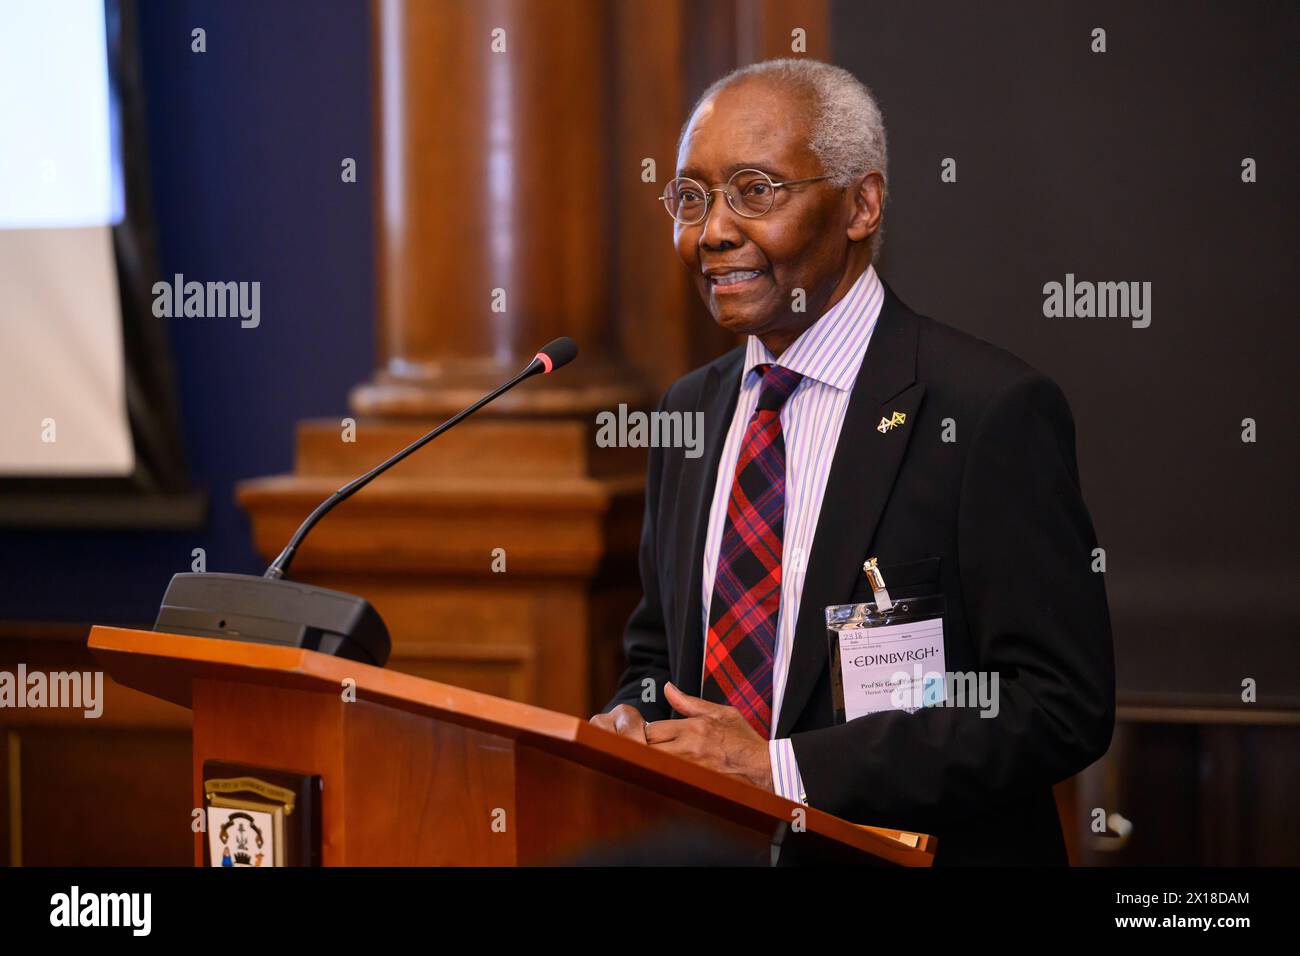 UNESCO International Day fro the Remembrance of the Slave Trade and its Abolition at Edinburgh City Chambers  Professor Sir Geoff Palmer Stock Photo